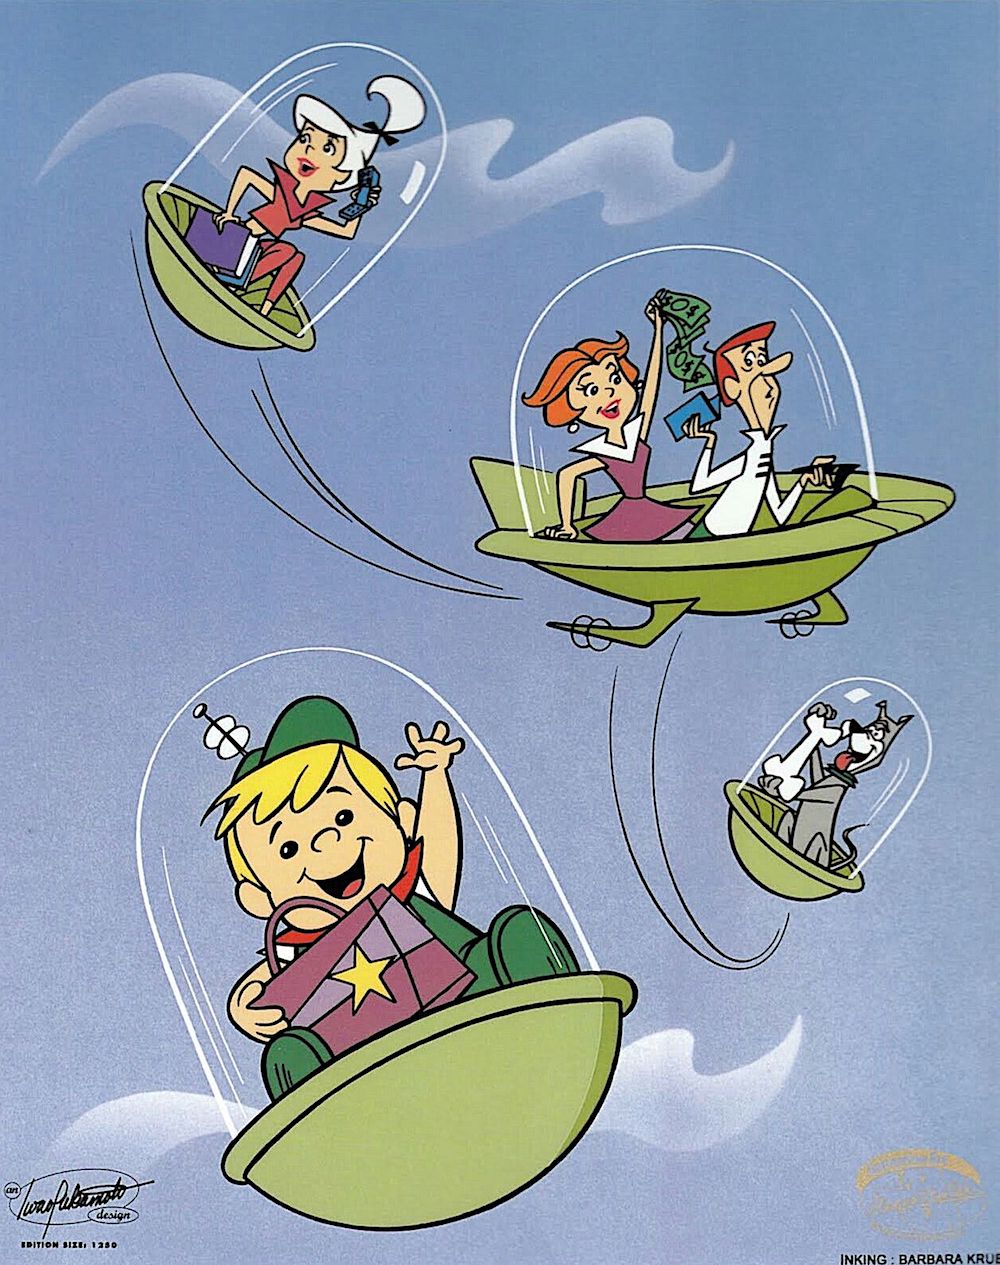 Hanna Barbera animation Jetsons morning, a future family starts their day